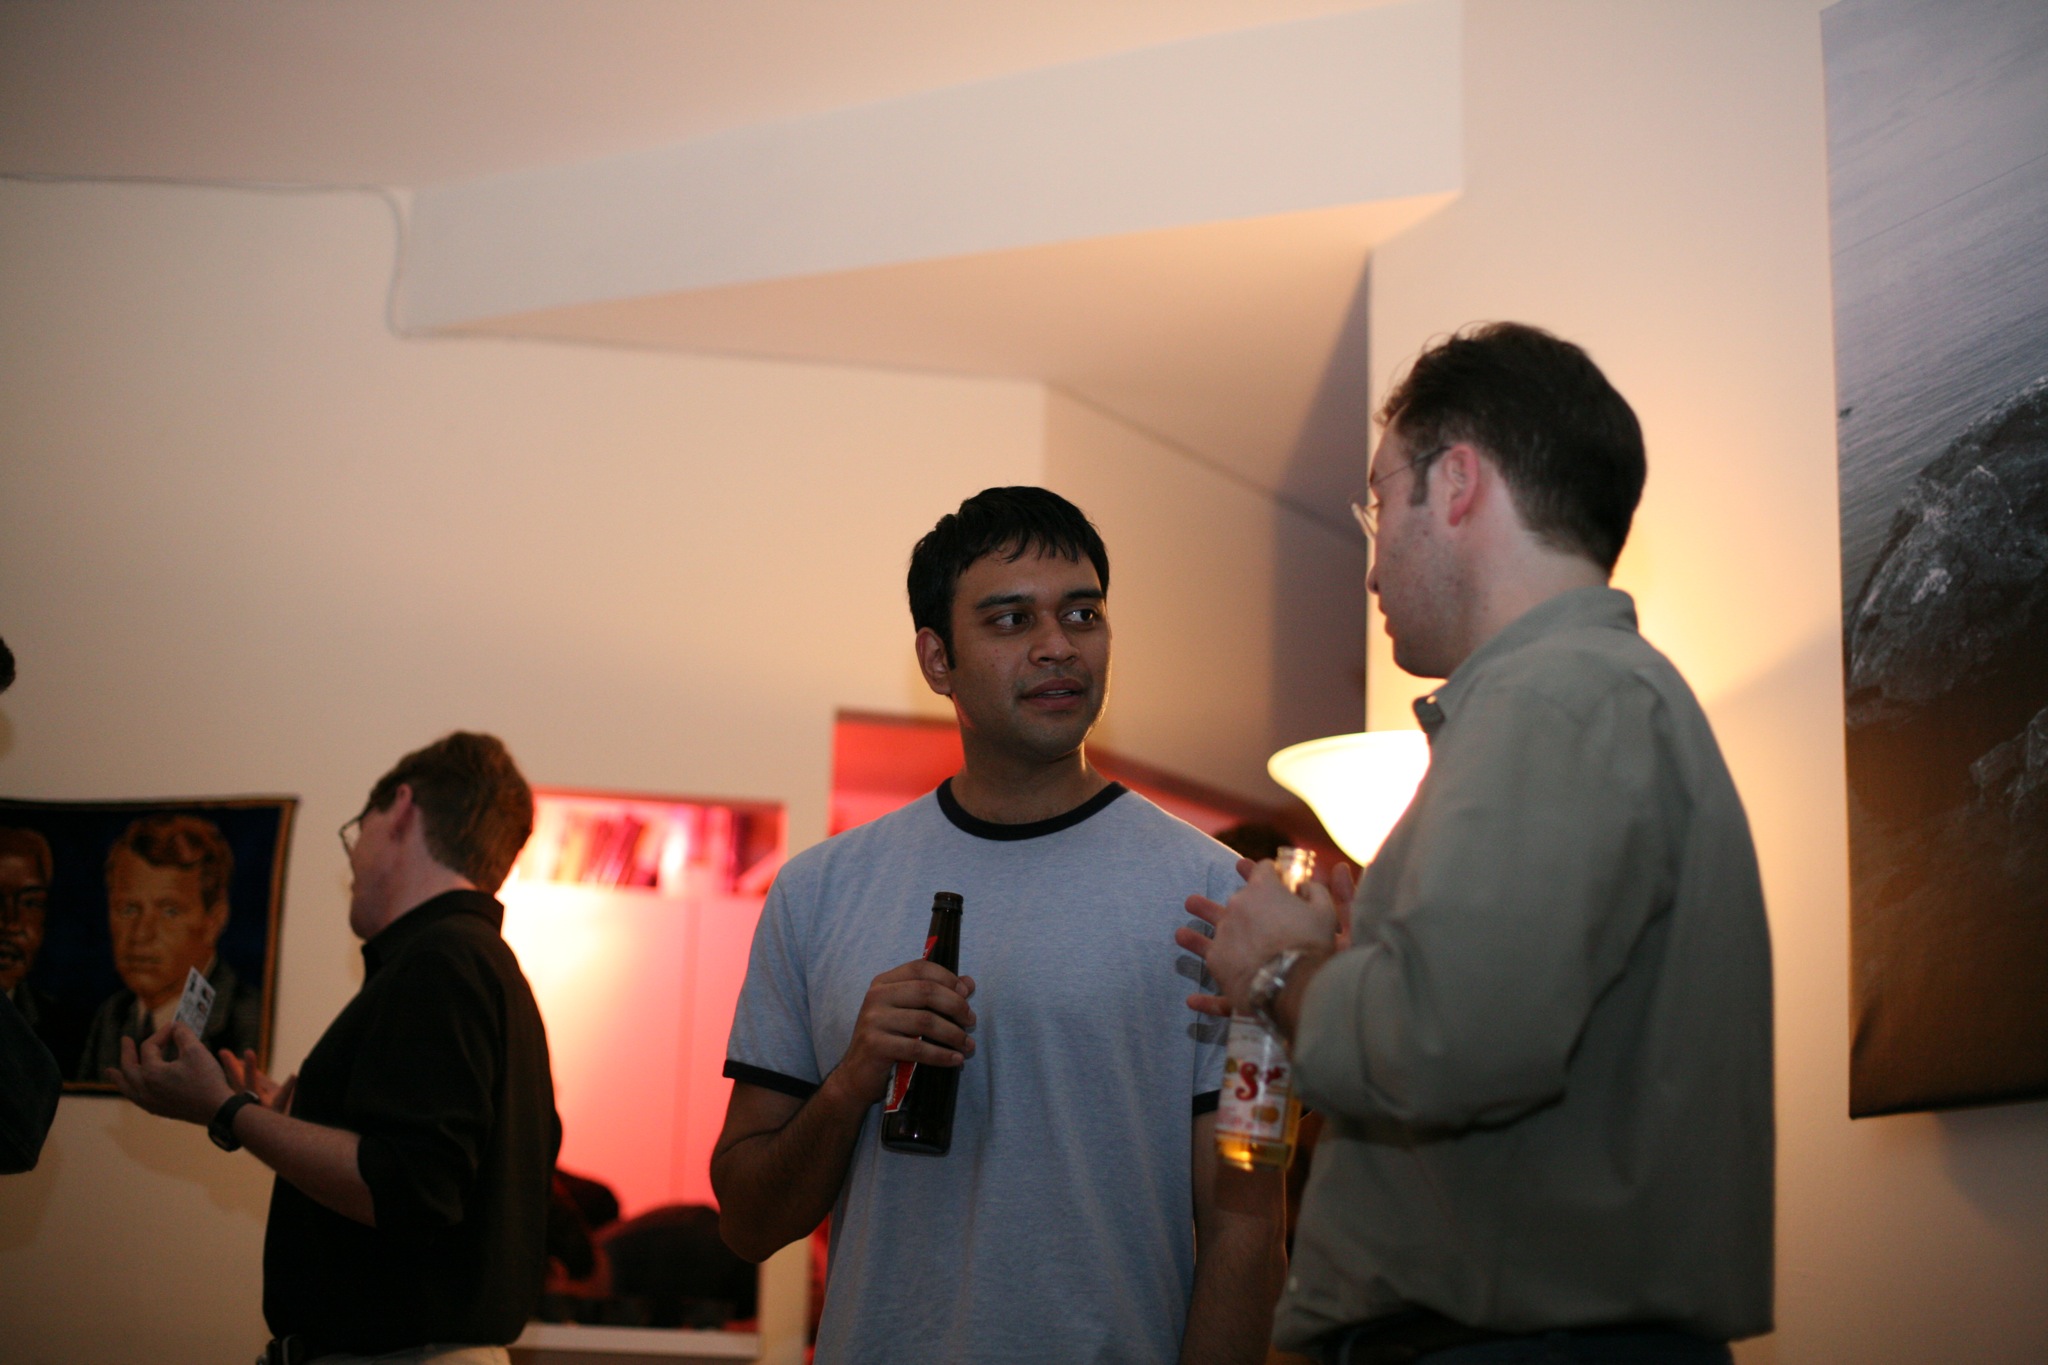 three men are standing in a room with some beers